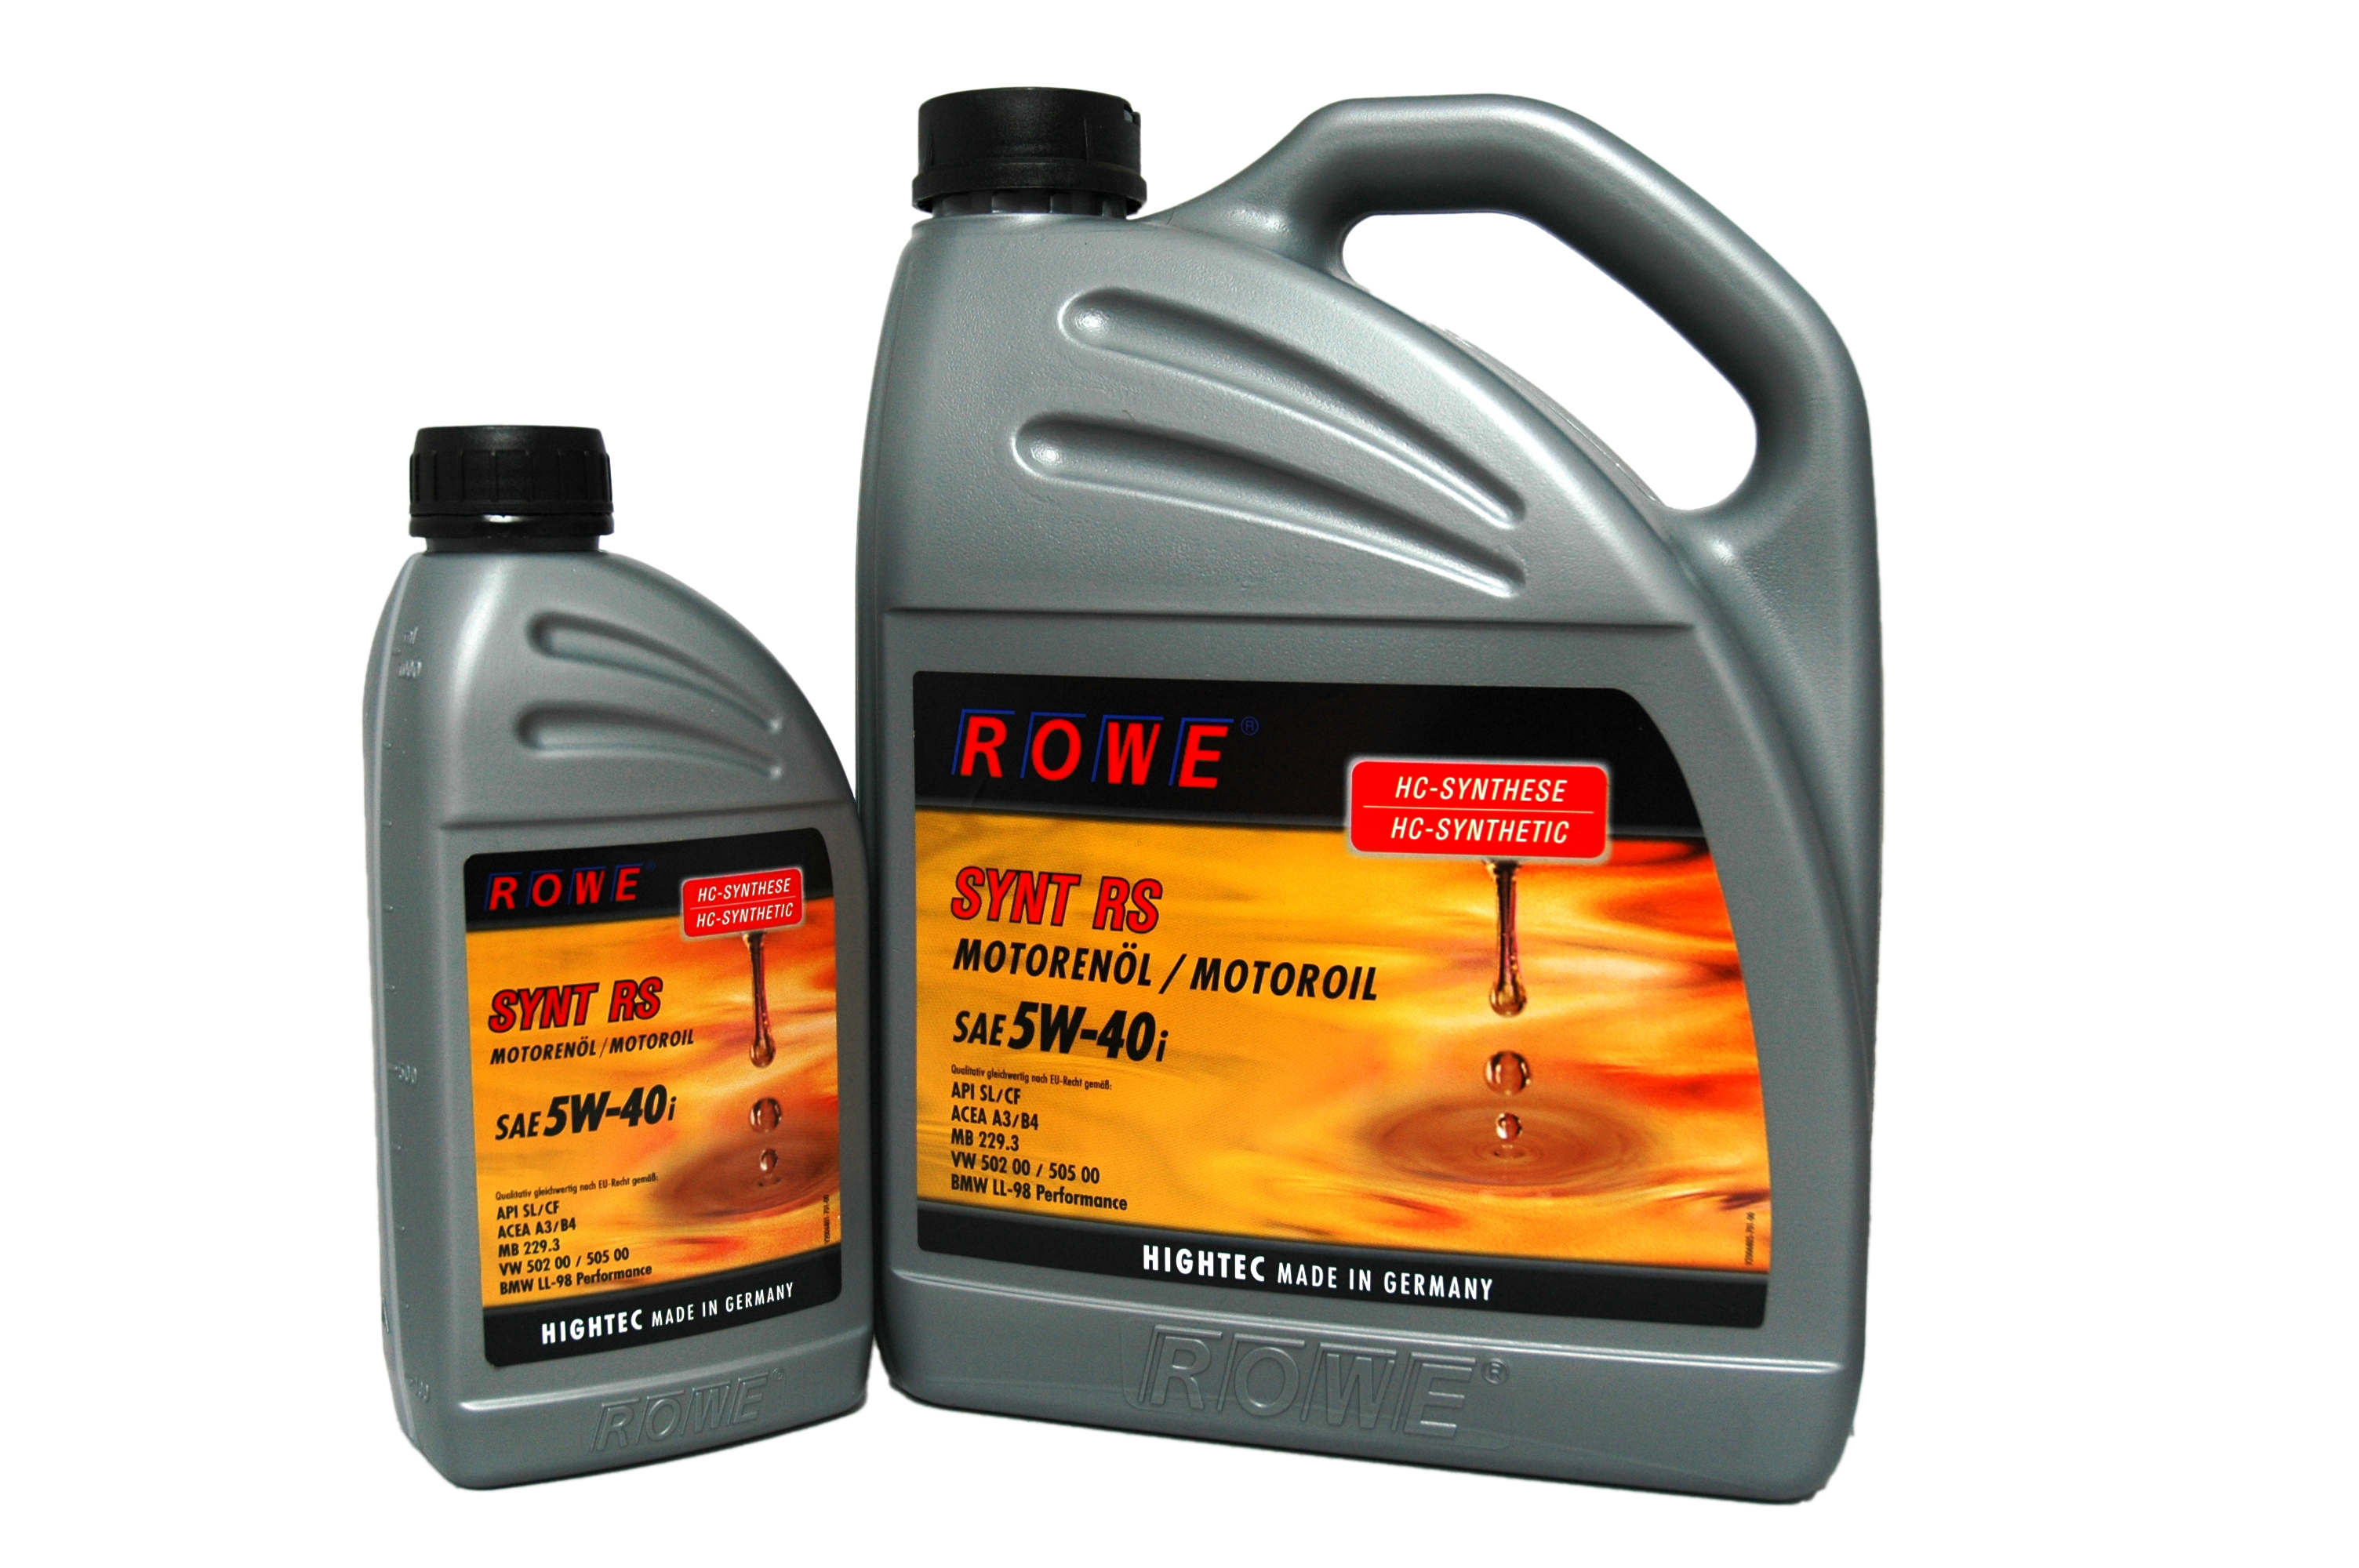 Sae 5 40. Масло Rowe 5w40 Hightec Synt 5-40. Rowe Hightec 5w-40 Synt Asia 4л. Rowe Synt RS 5w40. Масло Rowe 5w40 Hightec Synt RS.